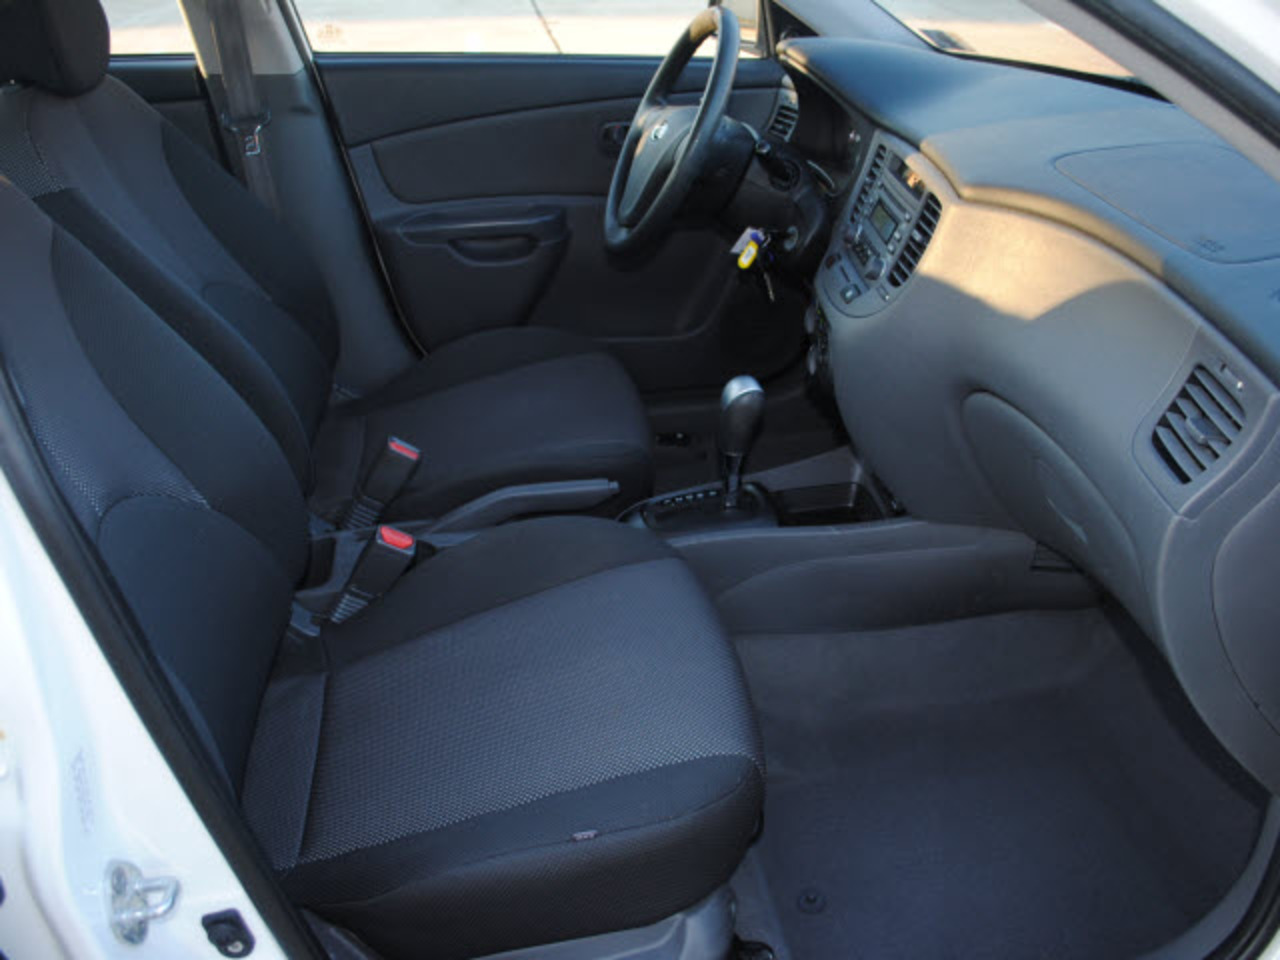 Kia Rio5 14 LX: Photo gallery, complete information about model ...